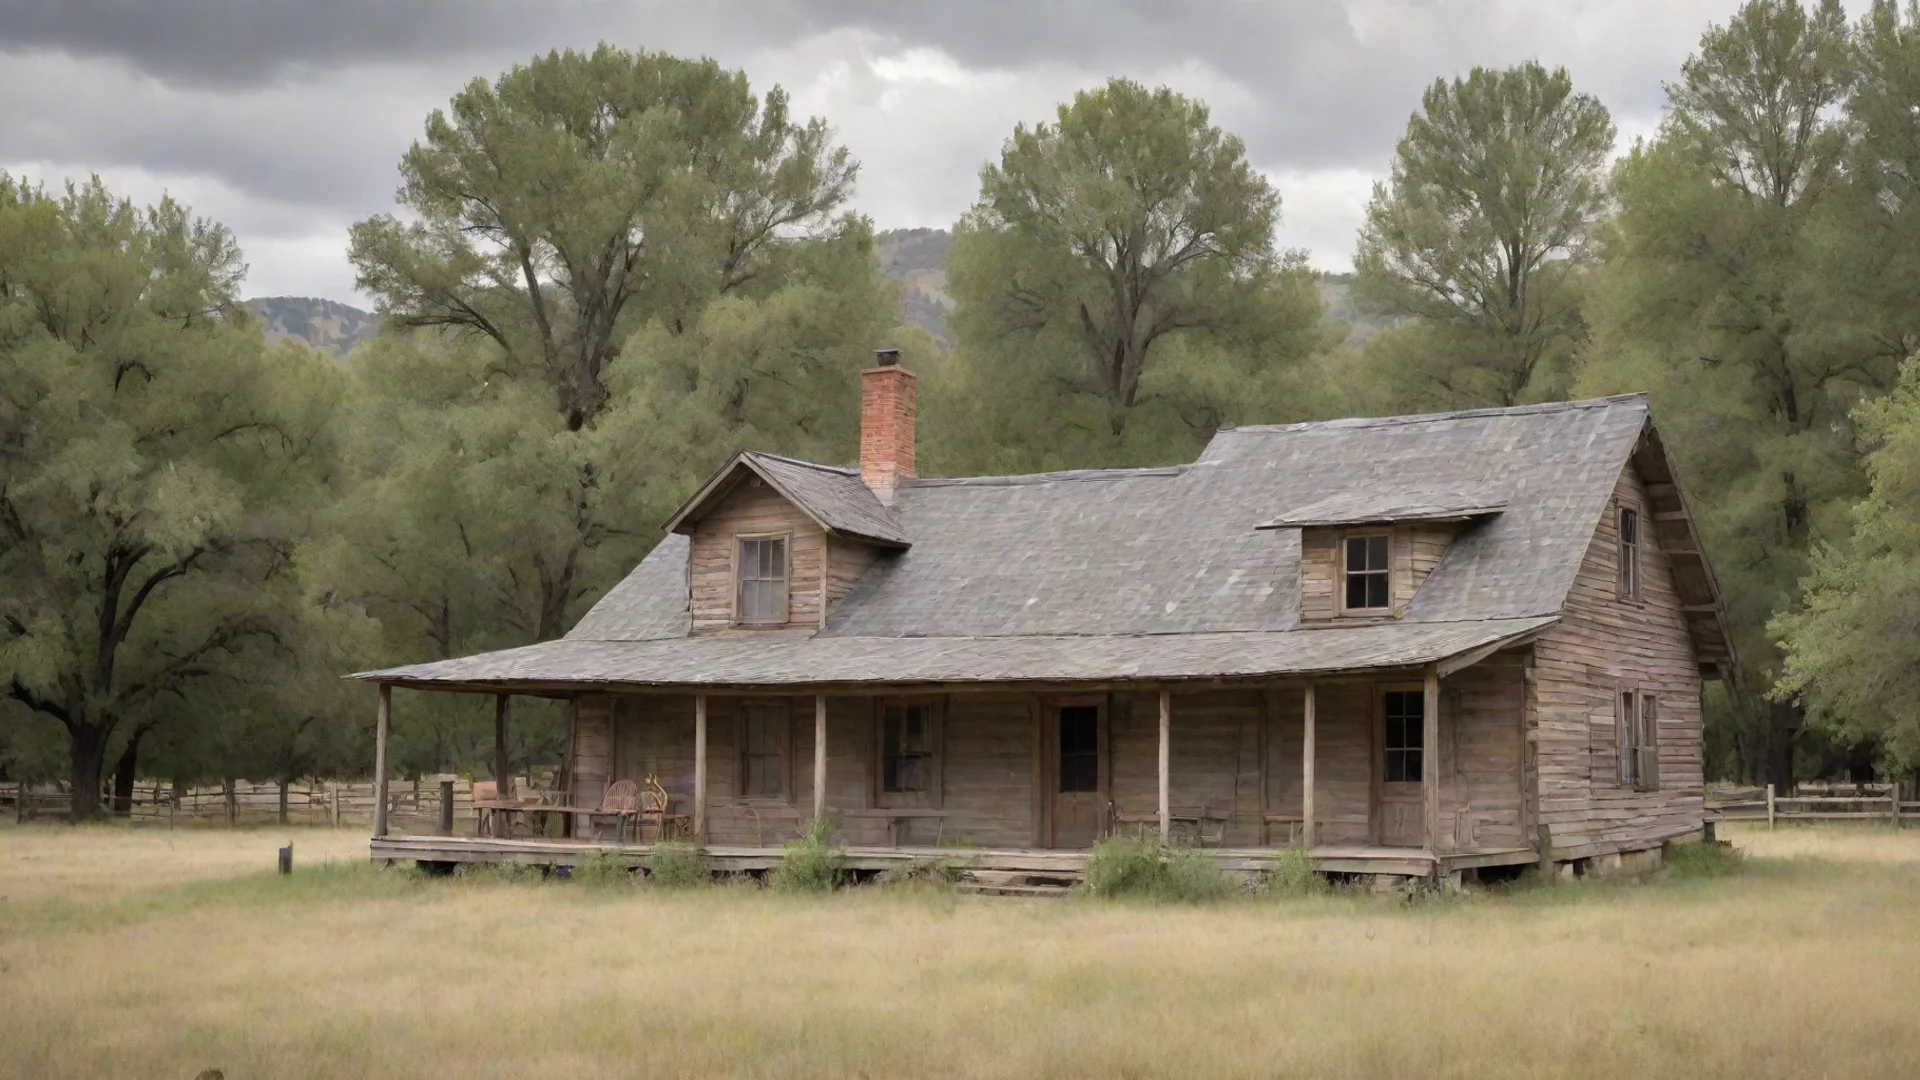 aipeaceful old timey ranch house in nature with no humans pictured wide